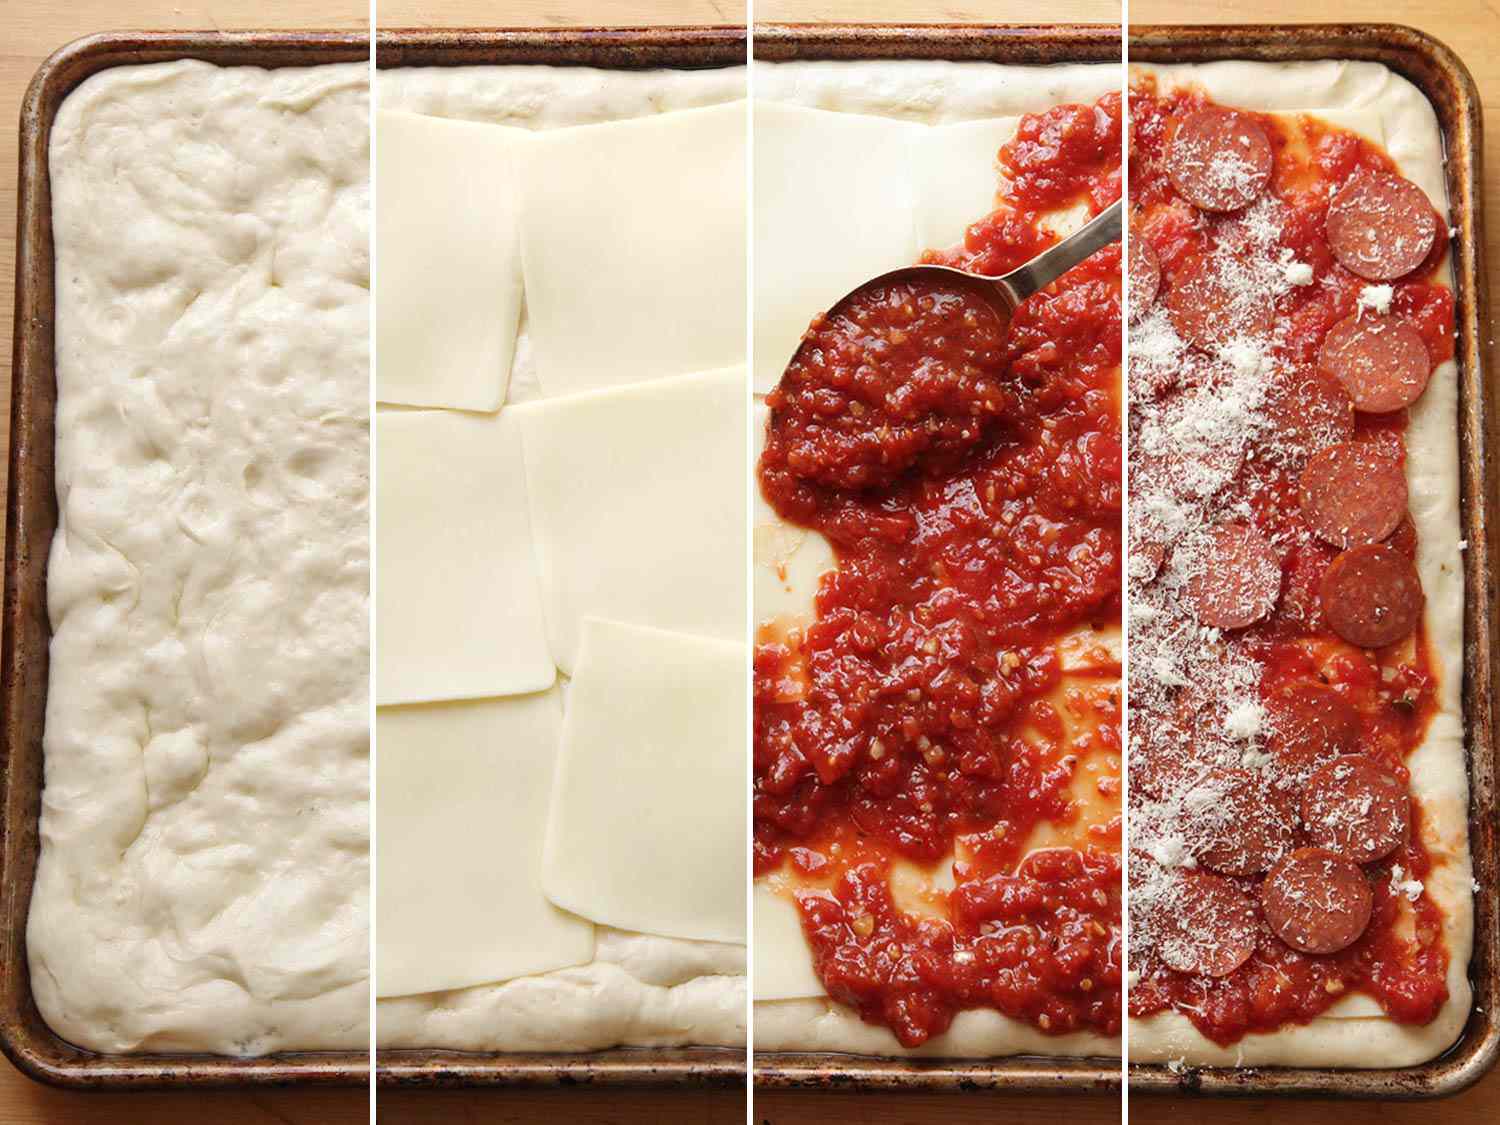 Collage of assembling a Sicilian-style pizza in the proper order, with cheese underneath the sauce.